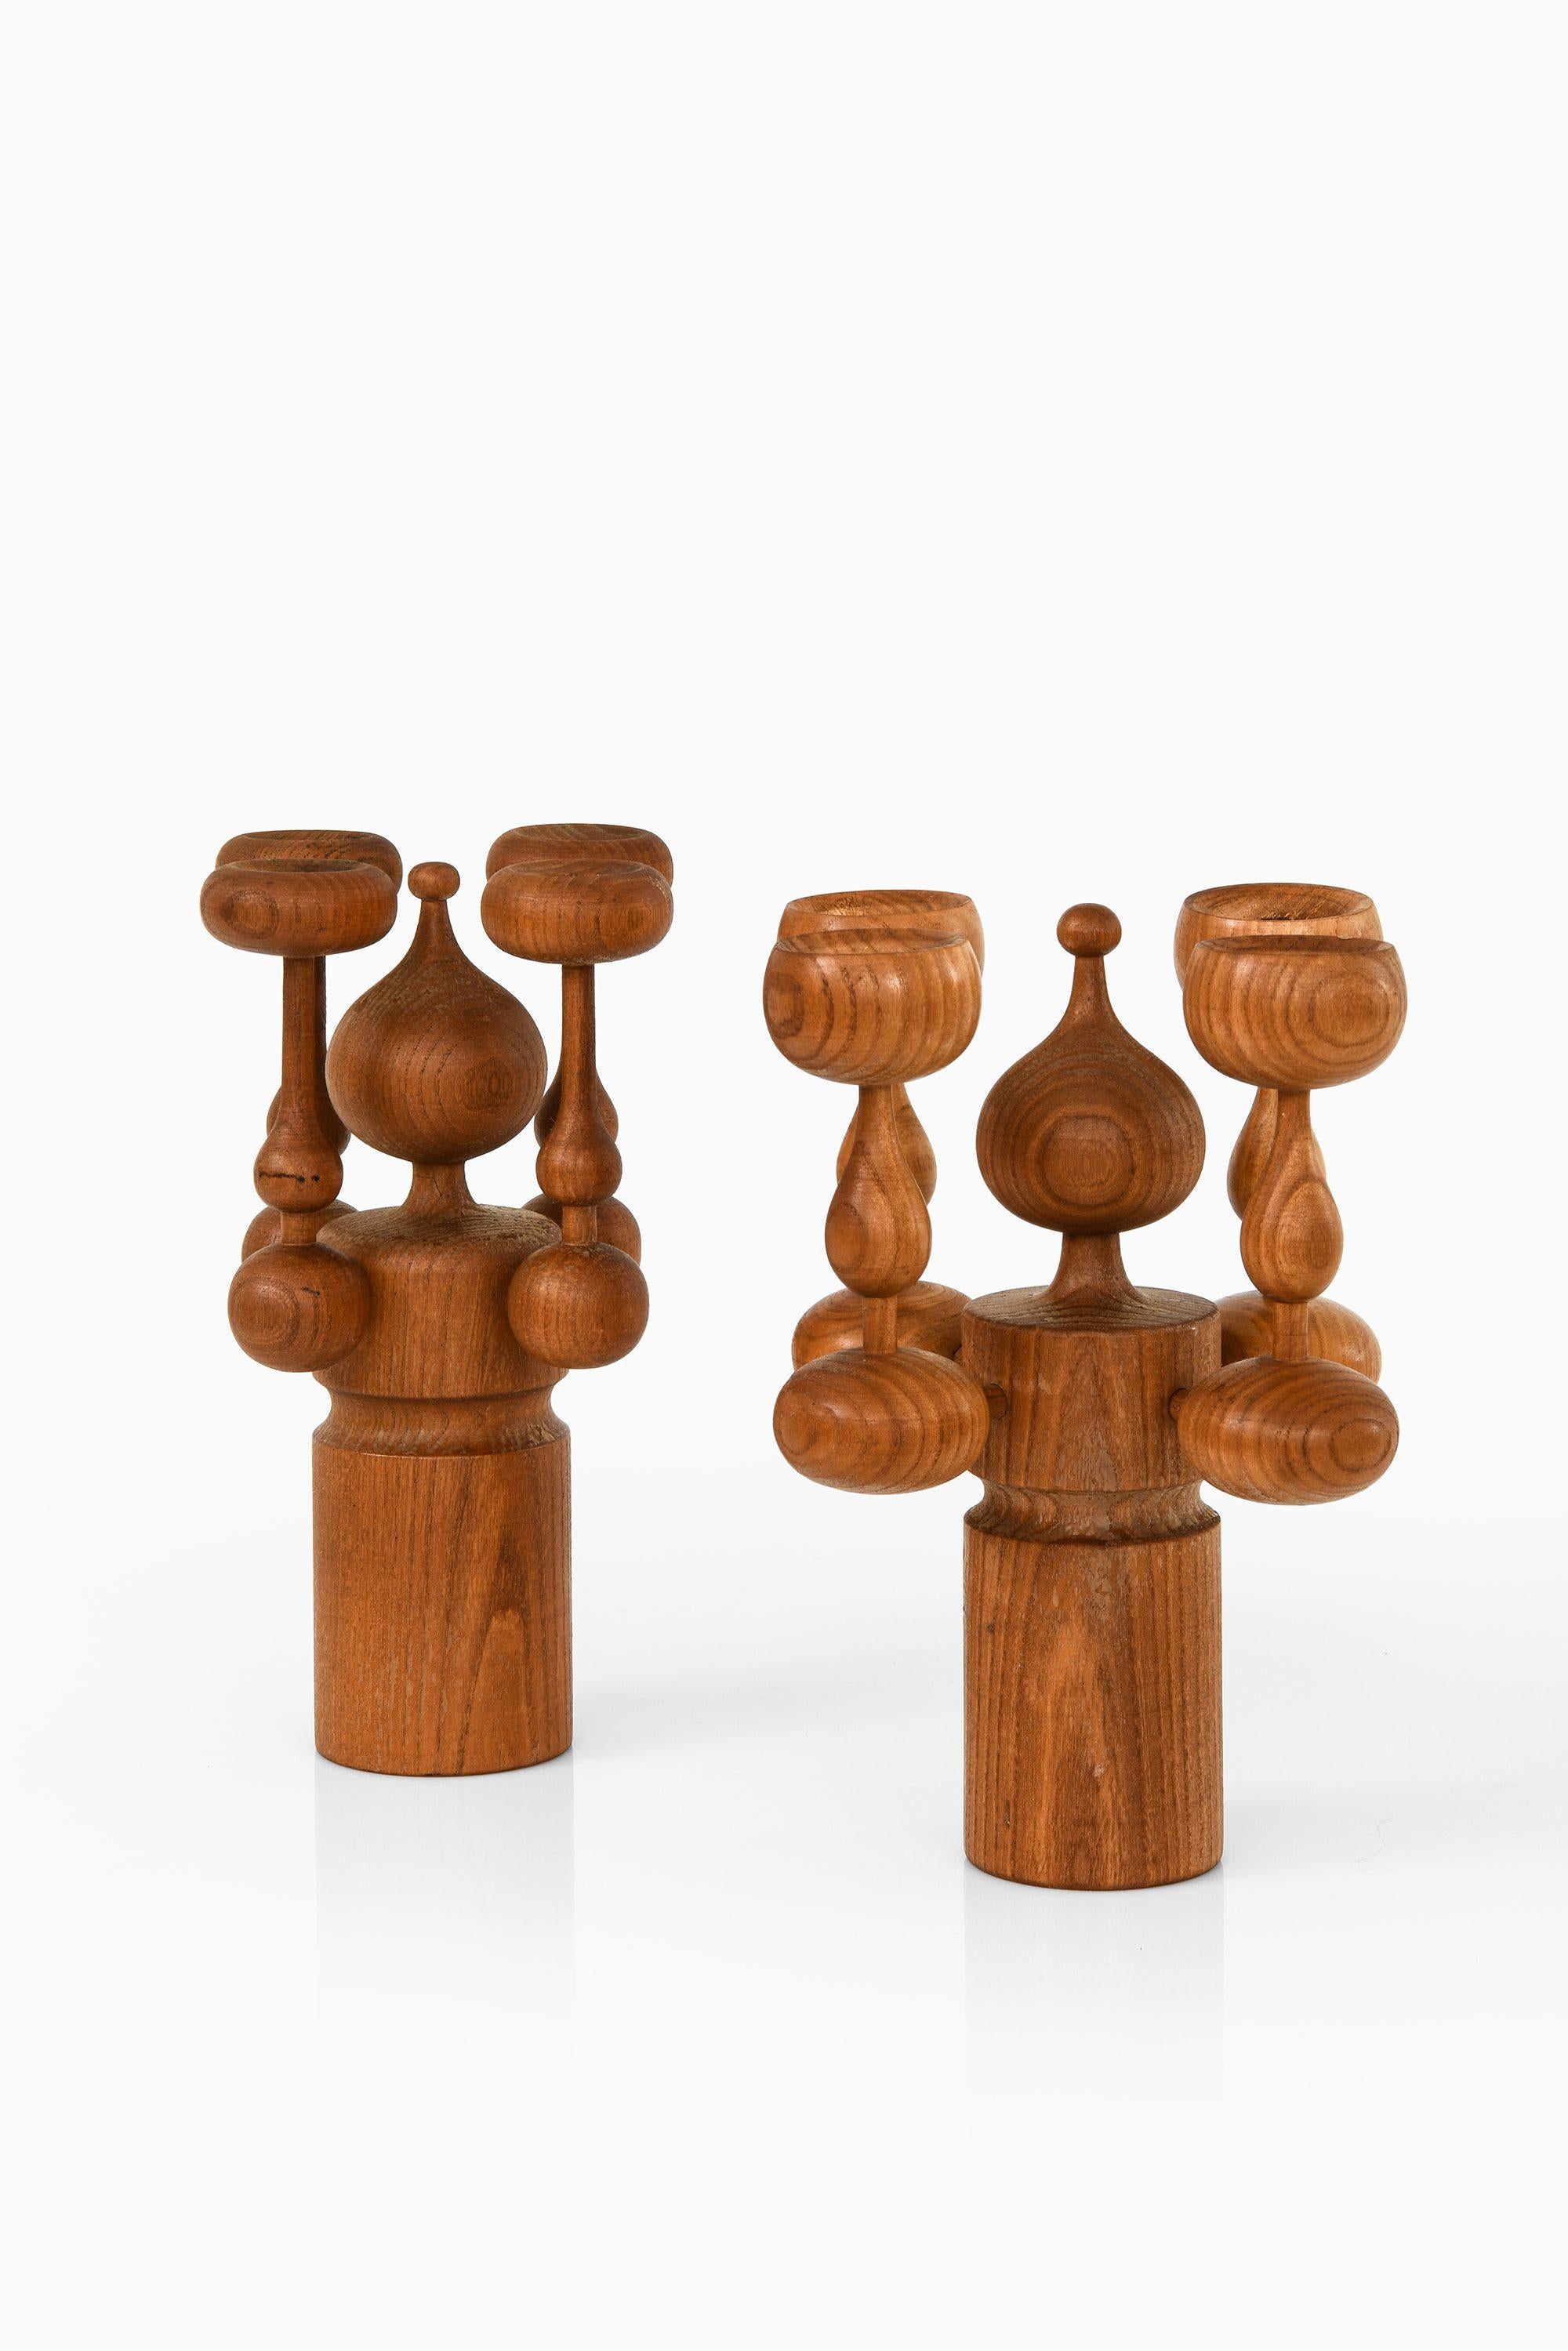 Pair of Candlesticks in Teak by Erik Höglund, 1950's

Additional Information:
Material: Teak
Style: Mid century, Scandinavian
Produced by Boda Trä in Sweden
Dimensions (W x D x H): 20 x 20 x 25 cm
Dimensions (W x D x H): 16.5 x 16.5 x 25.5